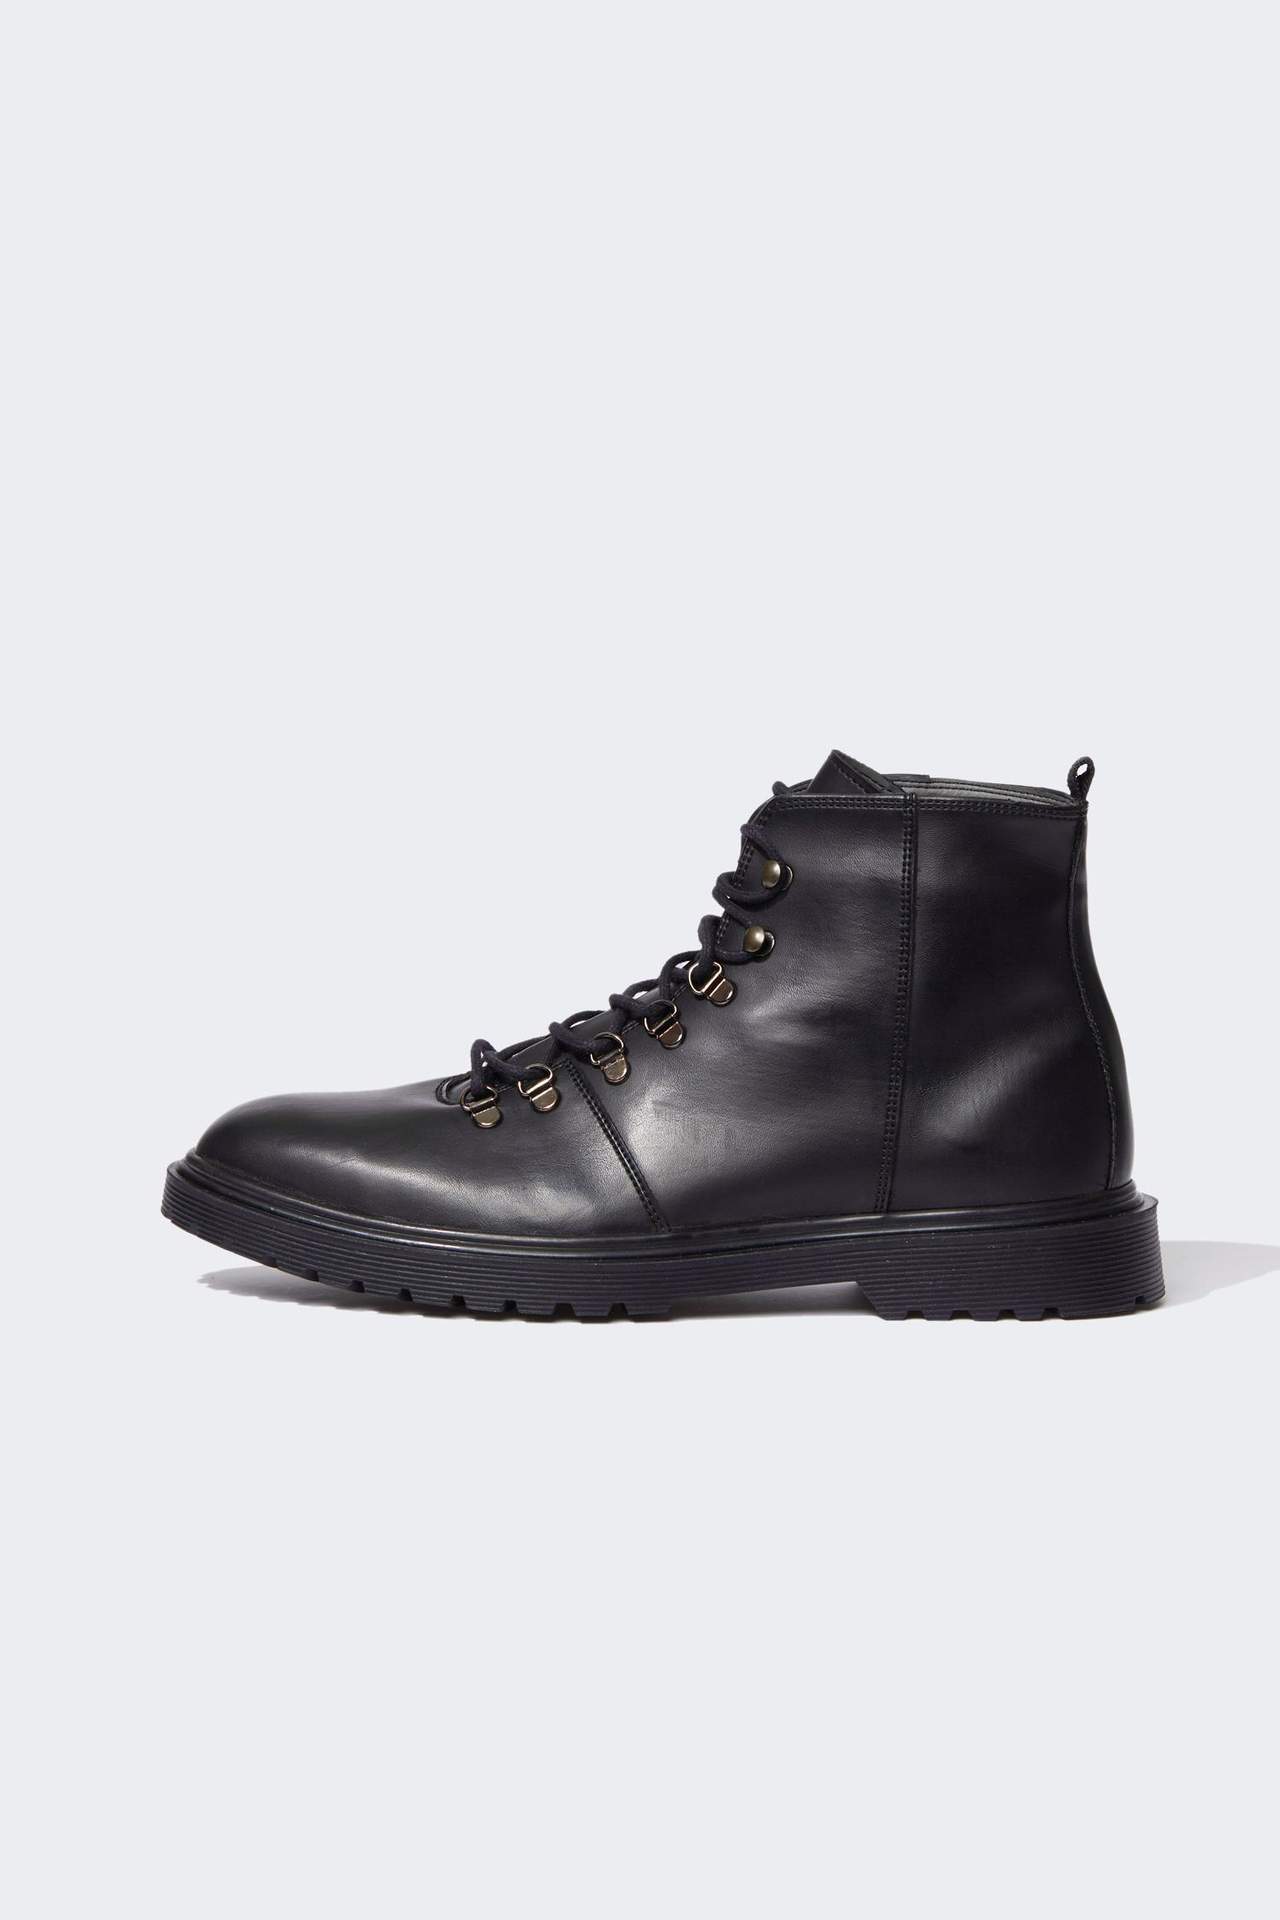 DEFACTO Faux Leather High Sole Boots